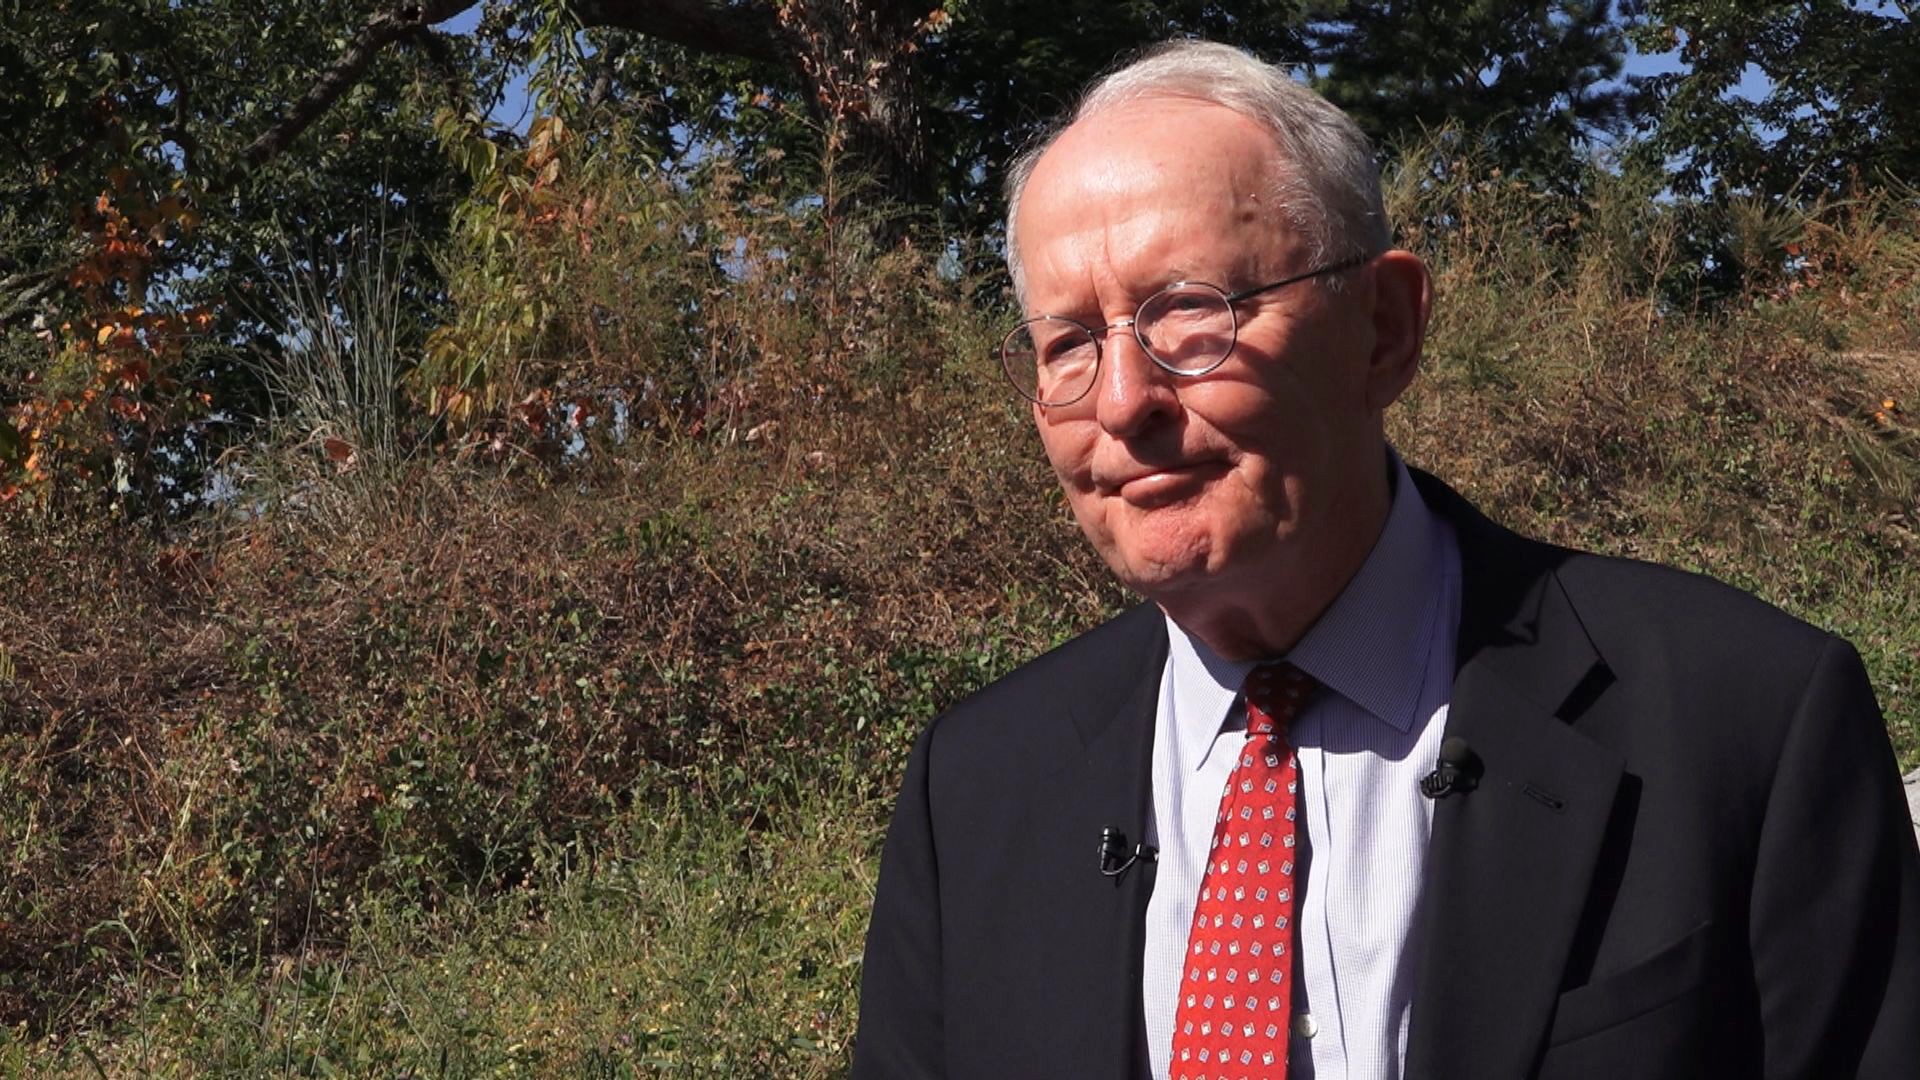 Senator Lamar Alexander explains what the new stimulus bill could mean for Tennesseans.